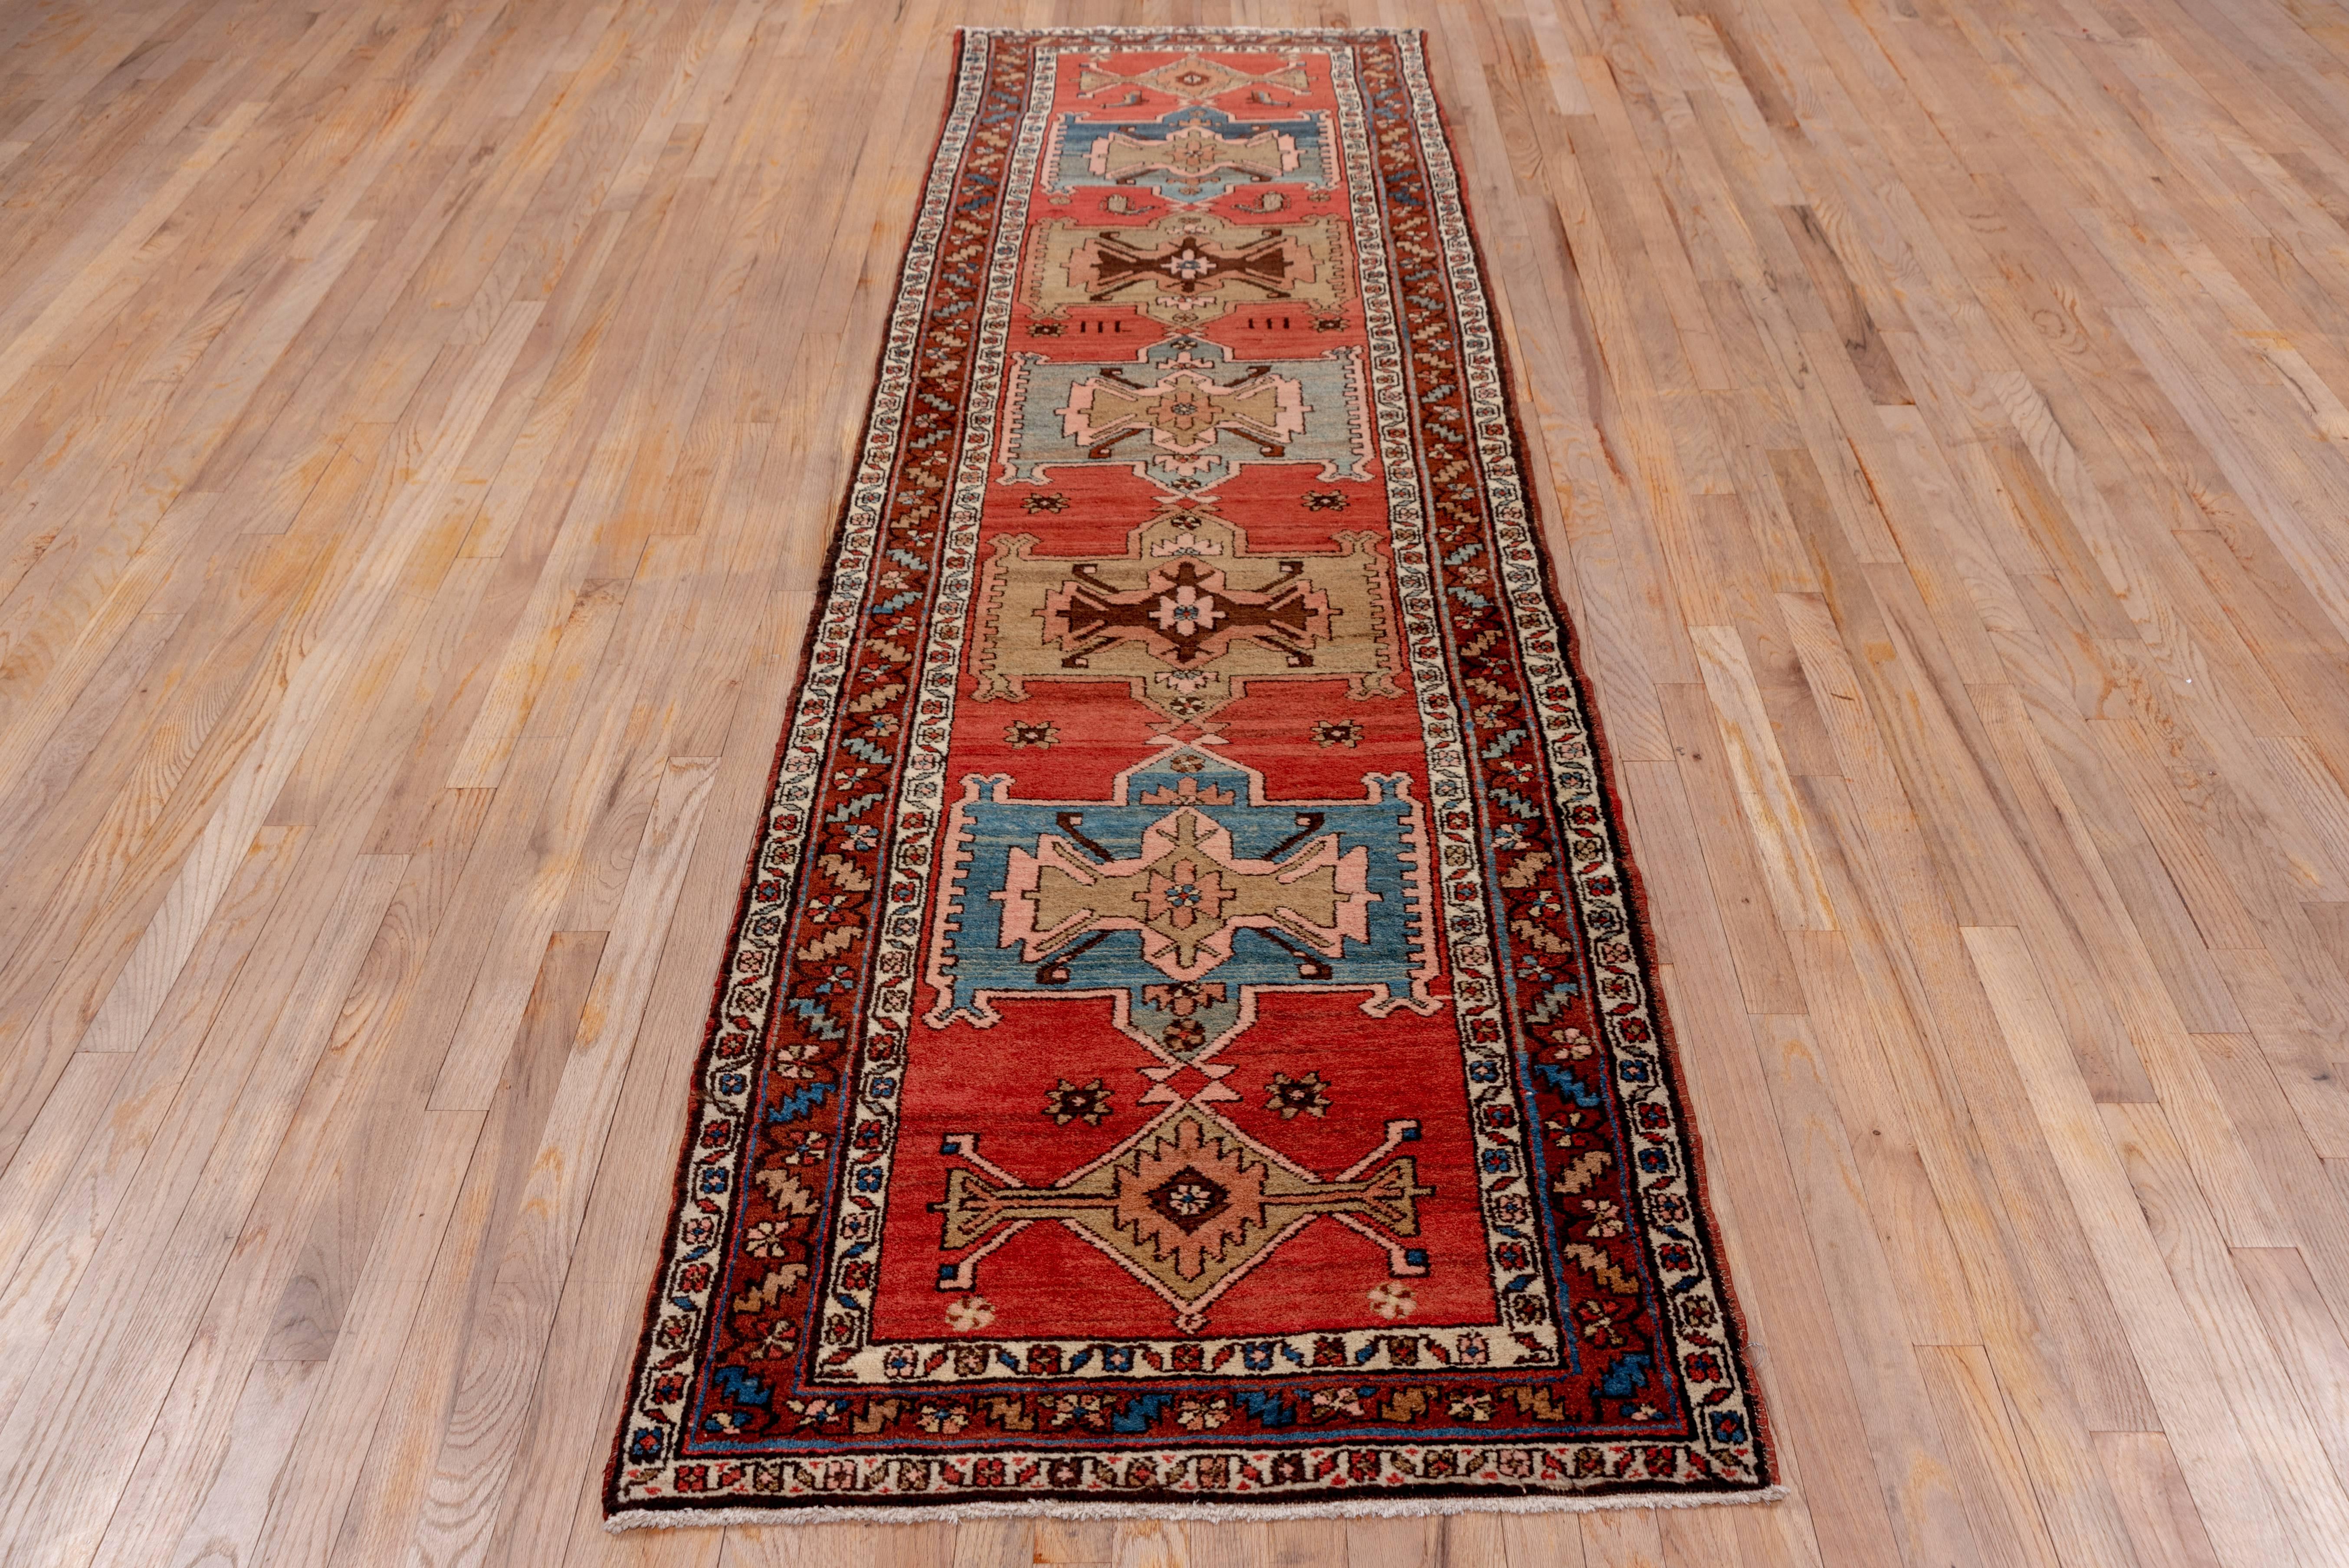 Serapi rugs are a high grade of Heriz weaving's. The well abrashed soft madder red nearly open ground has a pole medallion of seven large and small connected rectangular and lozenge form elements in turquoise, camel, beige, lime and dark brown. The